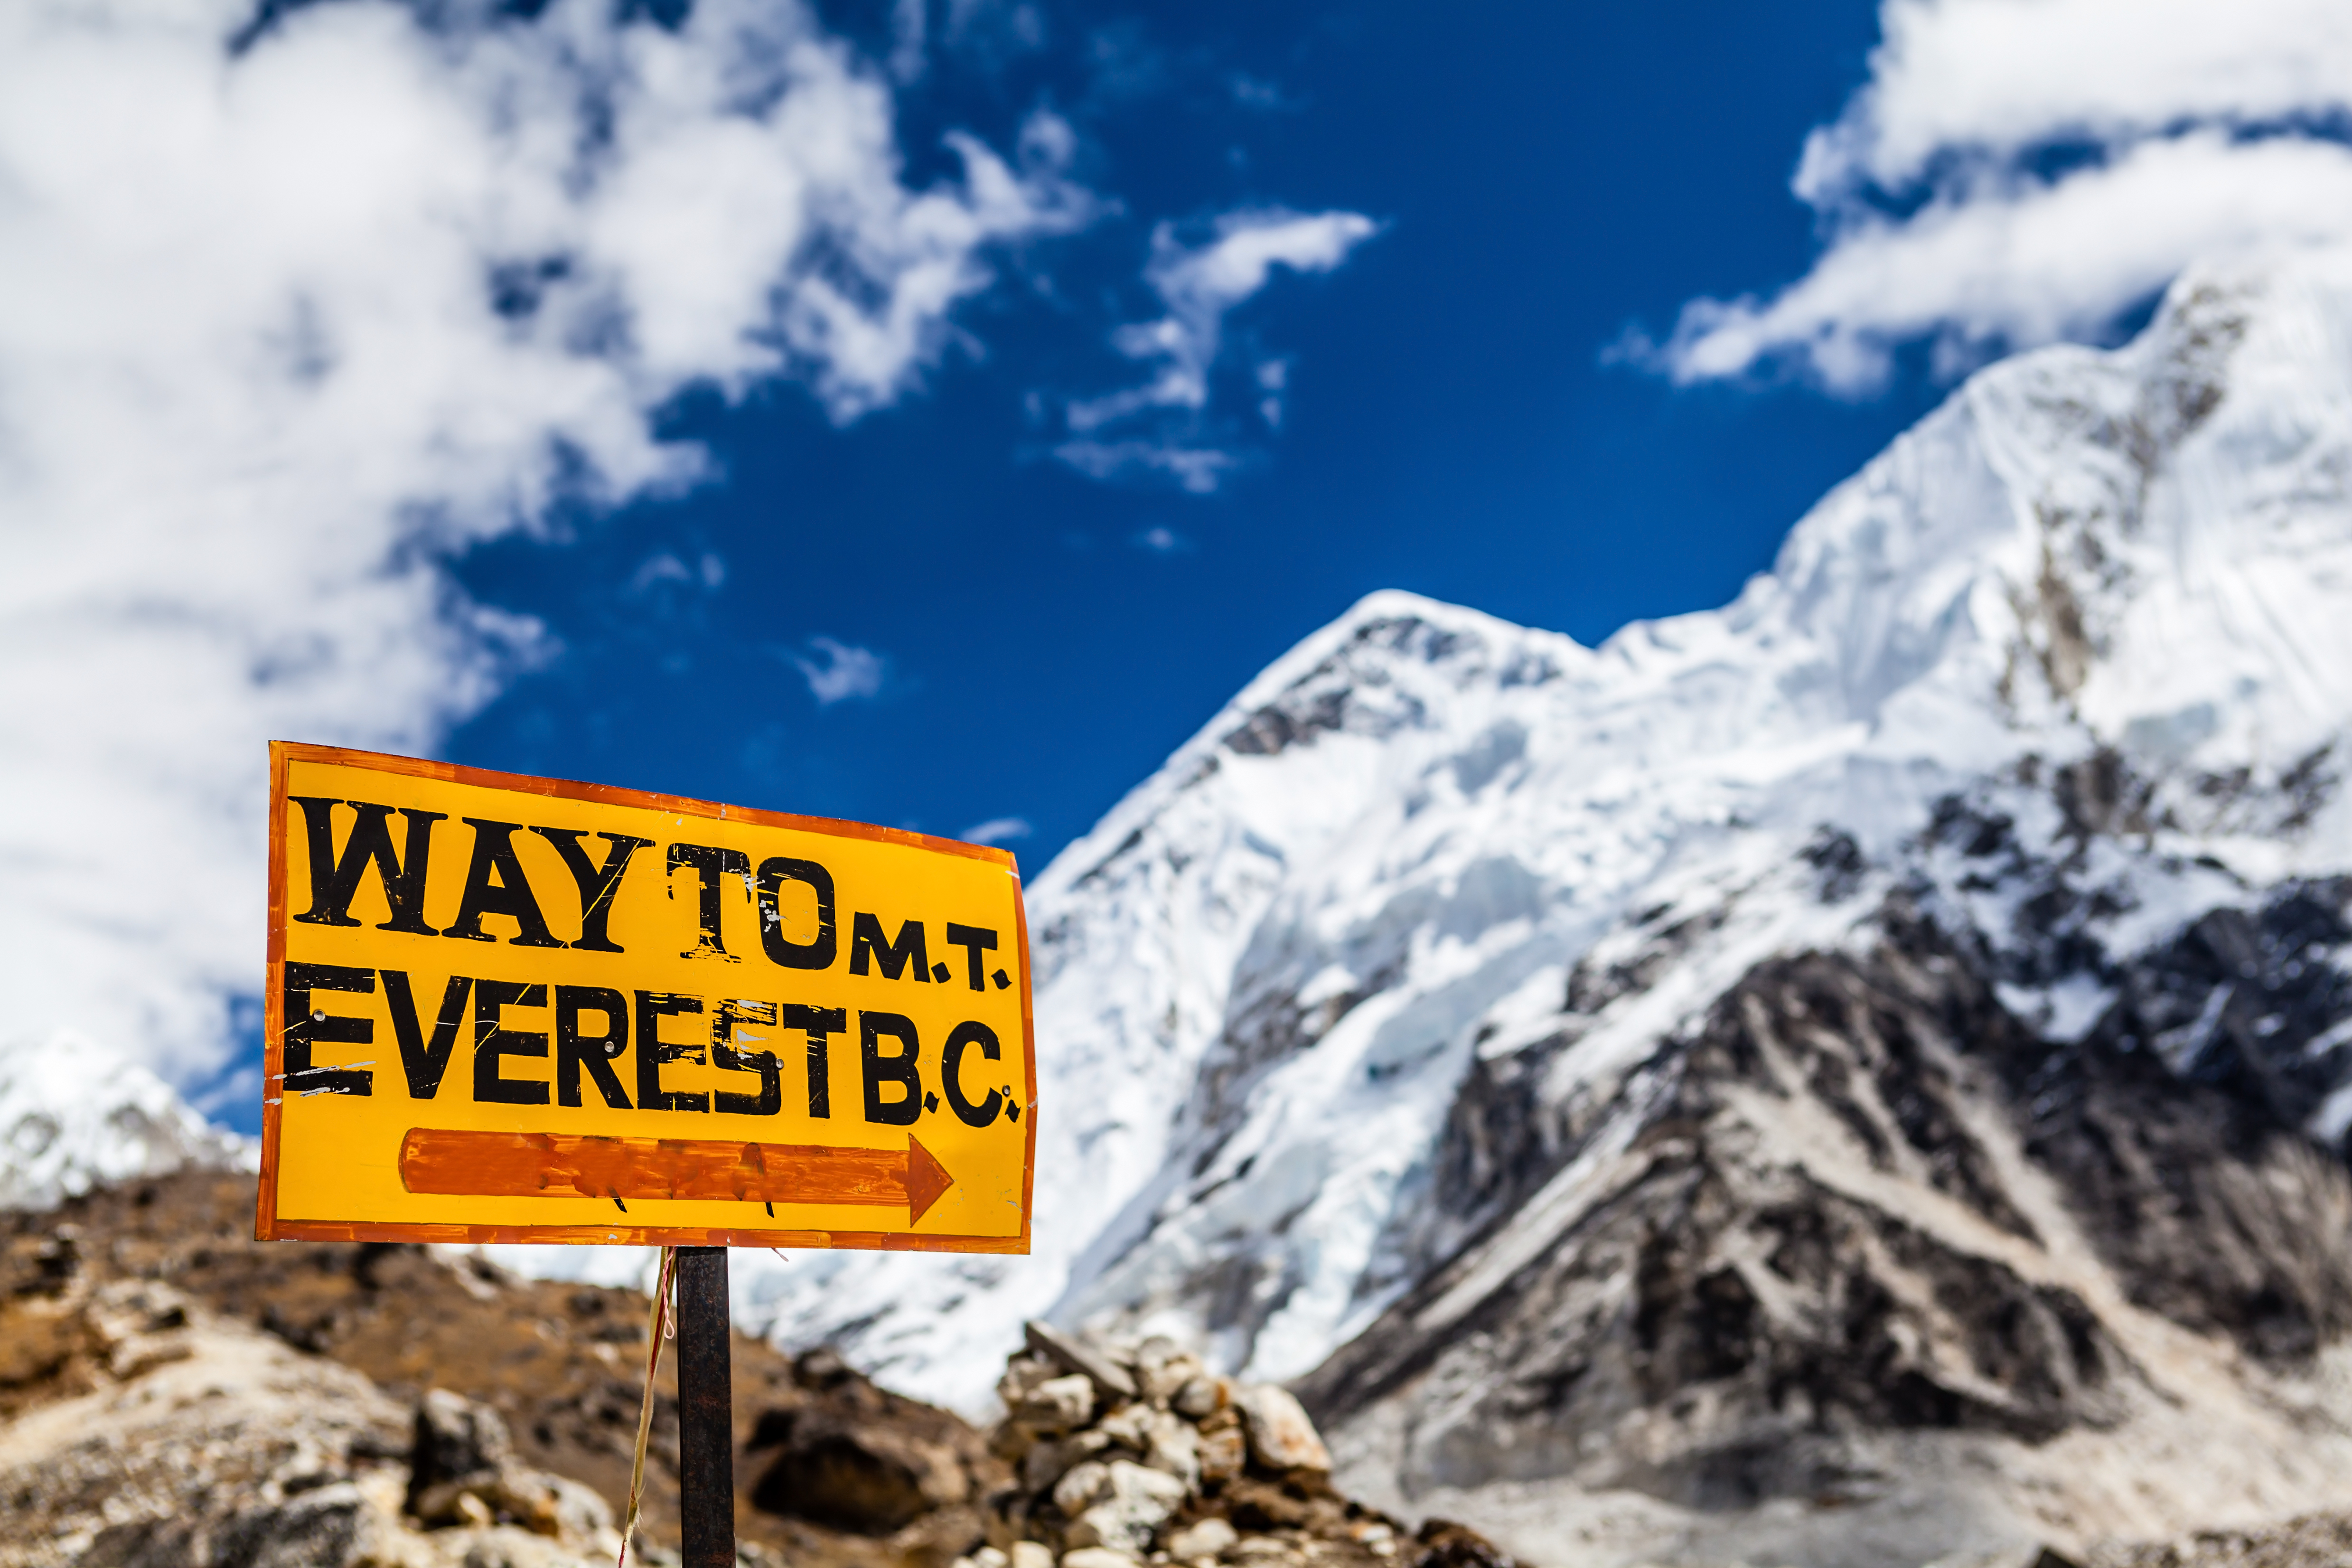 Tips for Successfully Trekking to Everest Base Camp - Sign Pointing Towards Mount Everest Base Camp